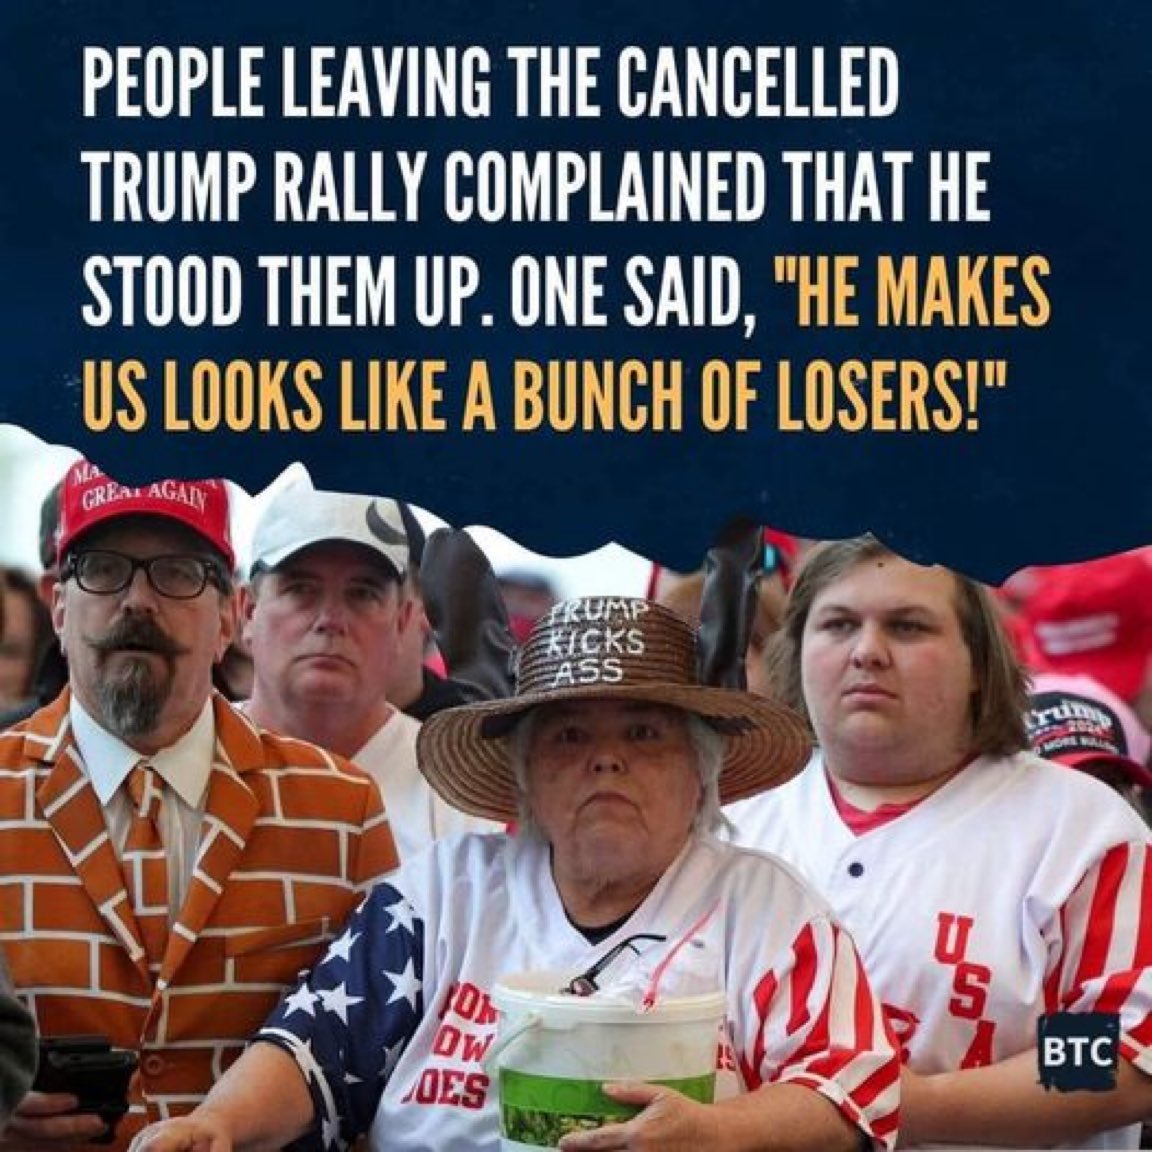 U didn’t need Trump to make u look like a bunch of losers. Btw, ❤️ the hat. And yes, he did kick your collective a$$